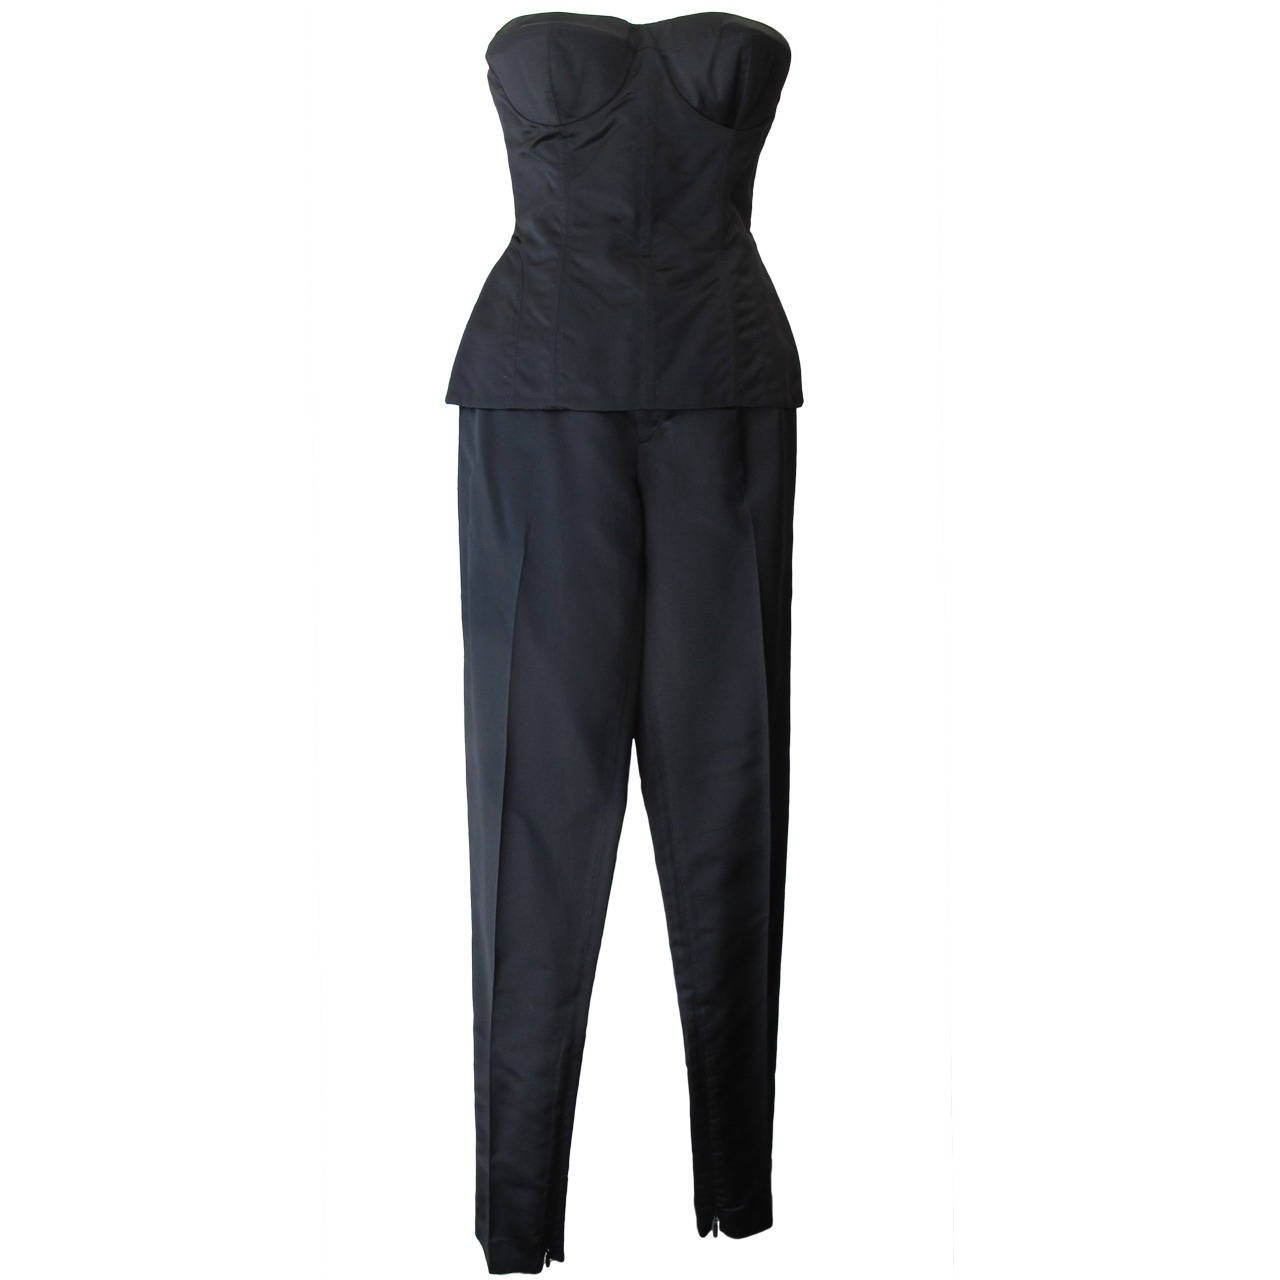 Tom Ford for Gucci Black Bustier and Matching Slacks For Sale